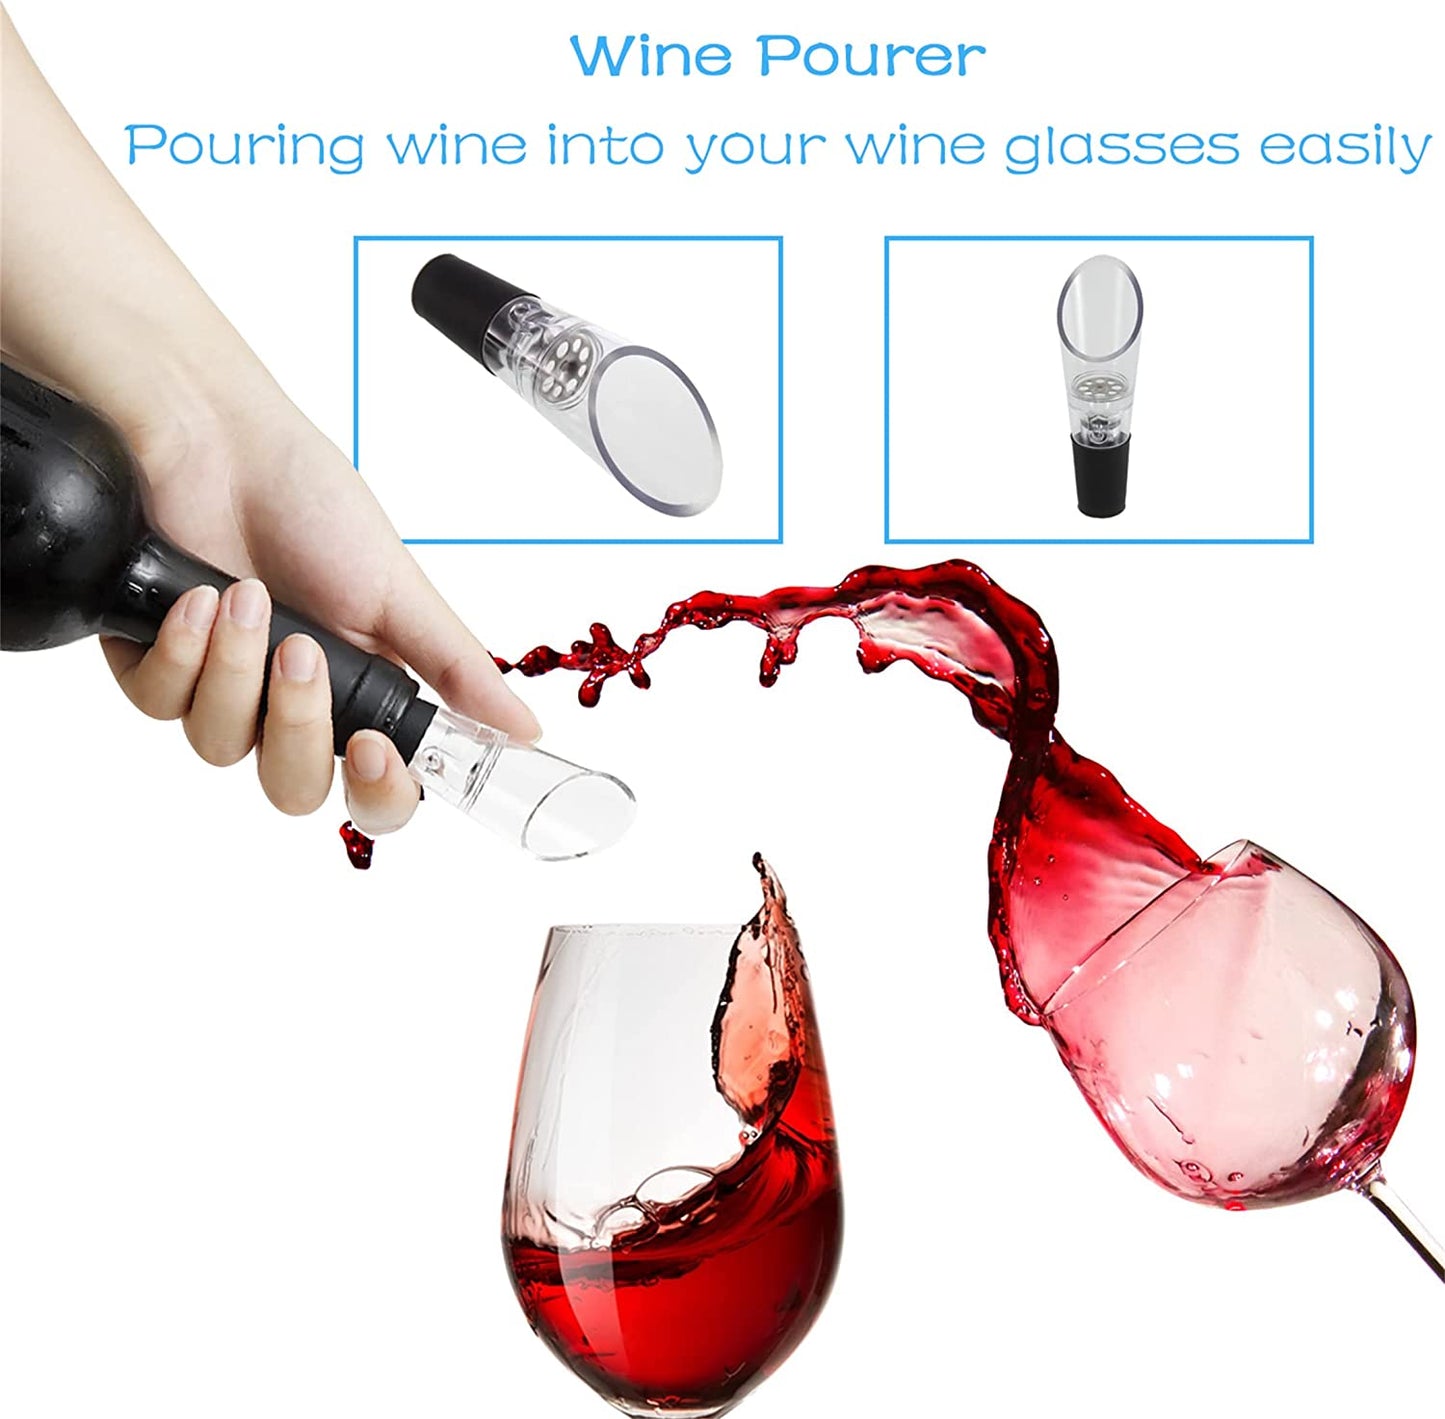 Electric Wine Bottle Opener Automatic Wine Opener Electric Corkscrew with Wine Aerator,Foil Cutter,Wine Stopper,Perfect Wine Gifts for Wine Lovers